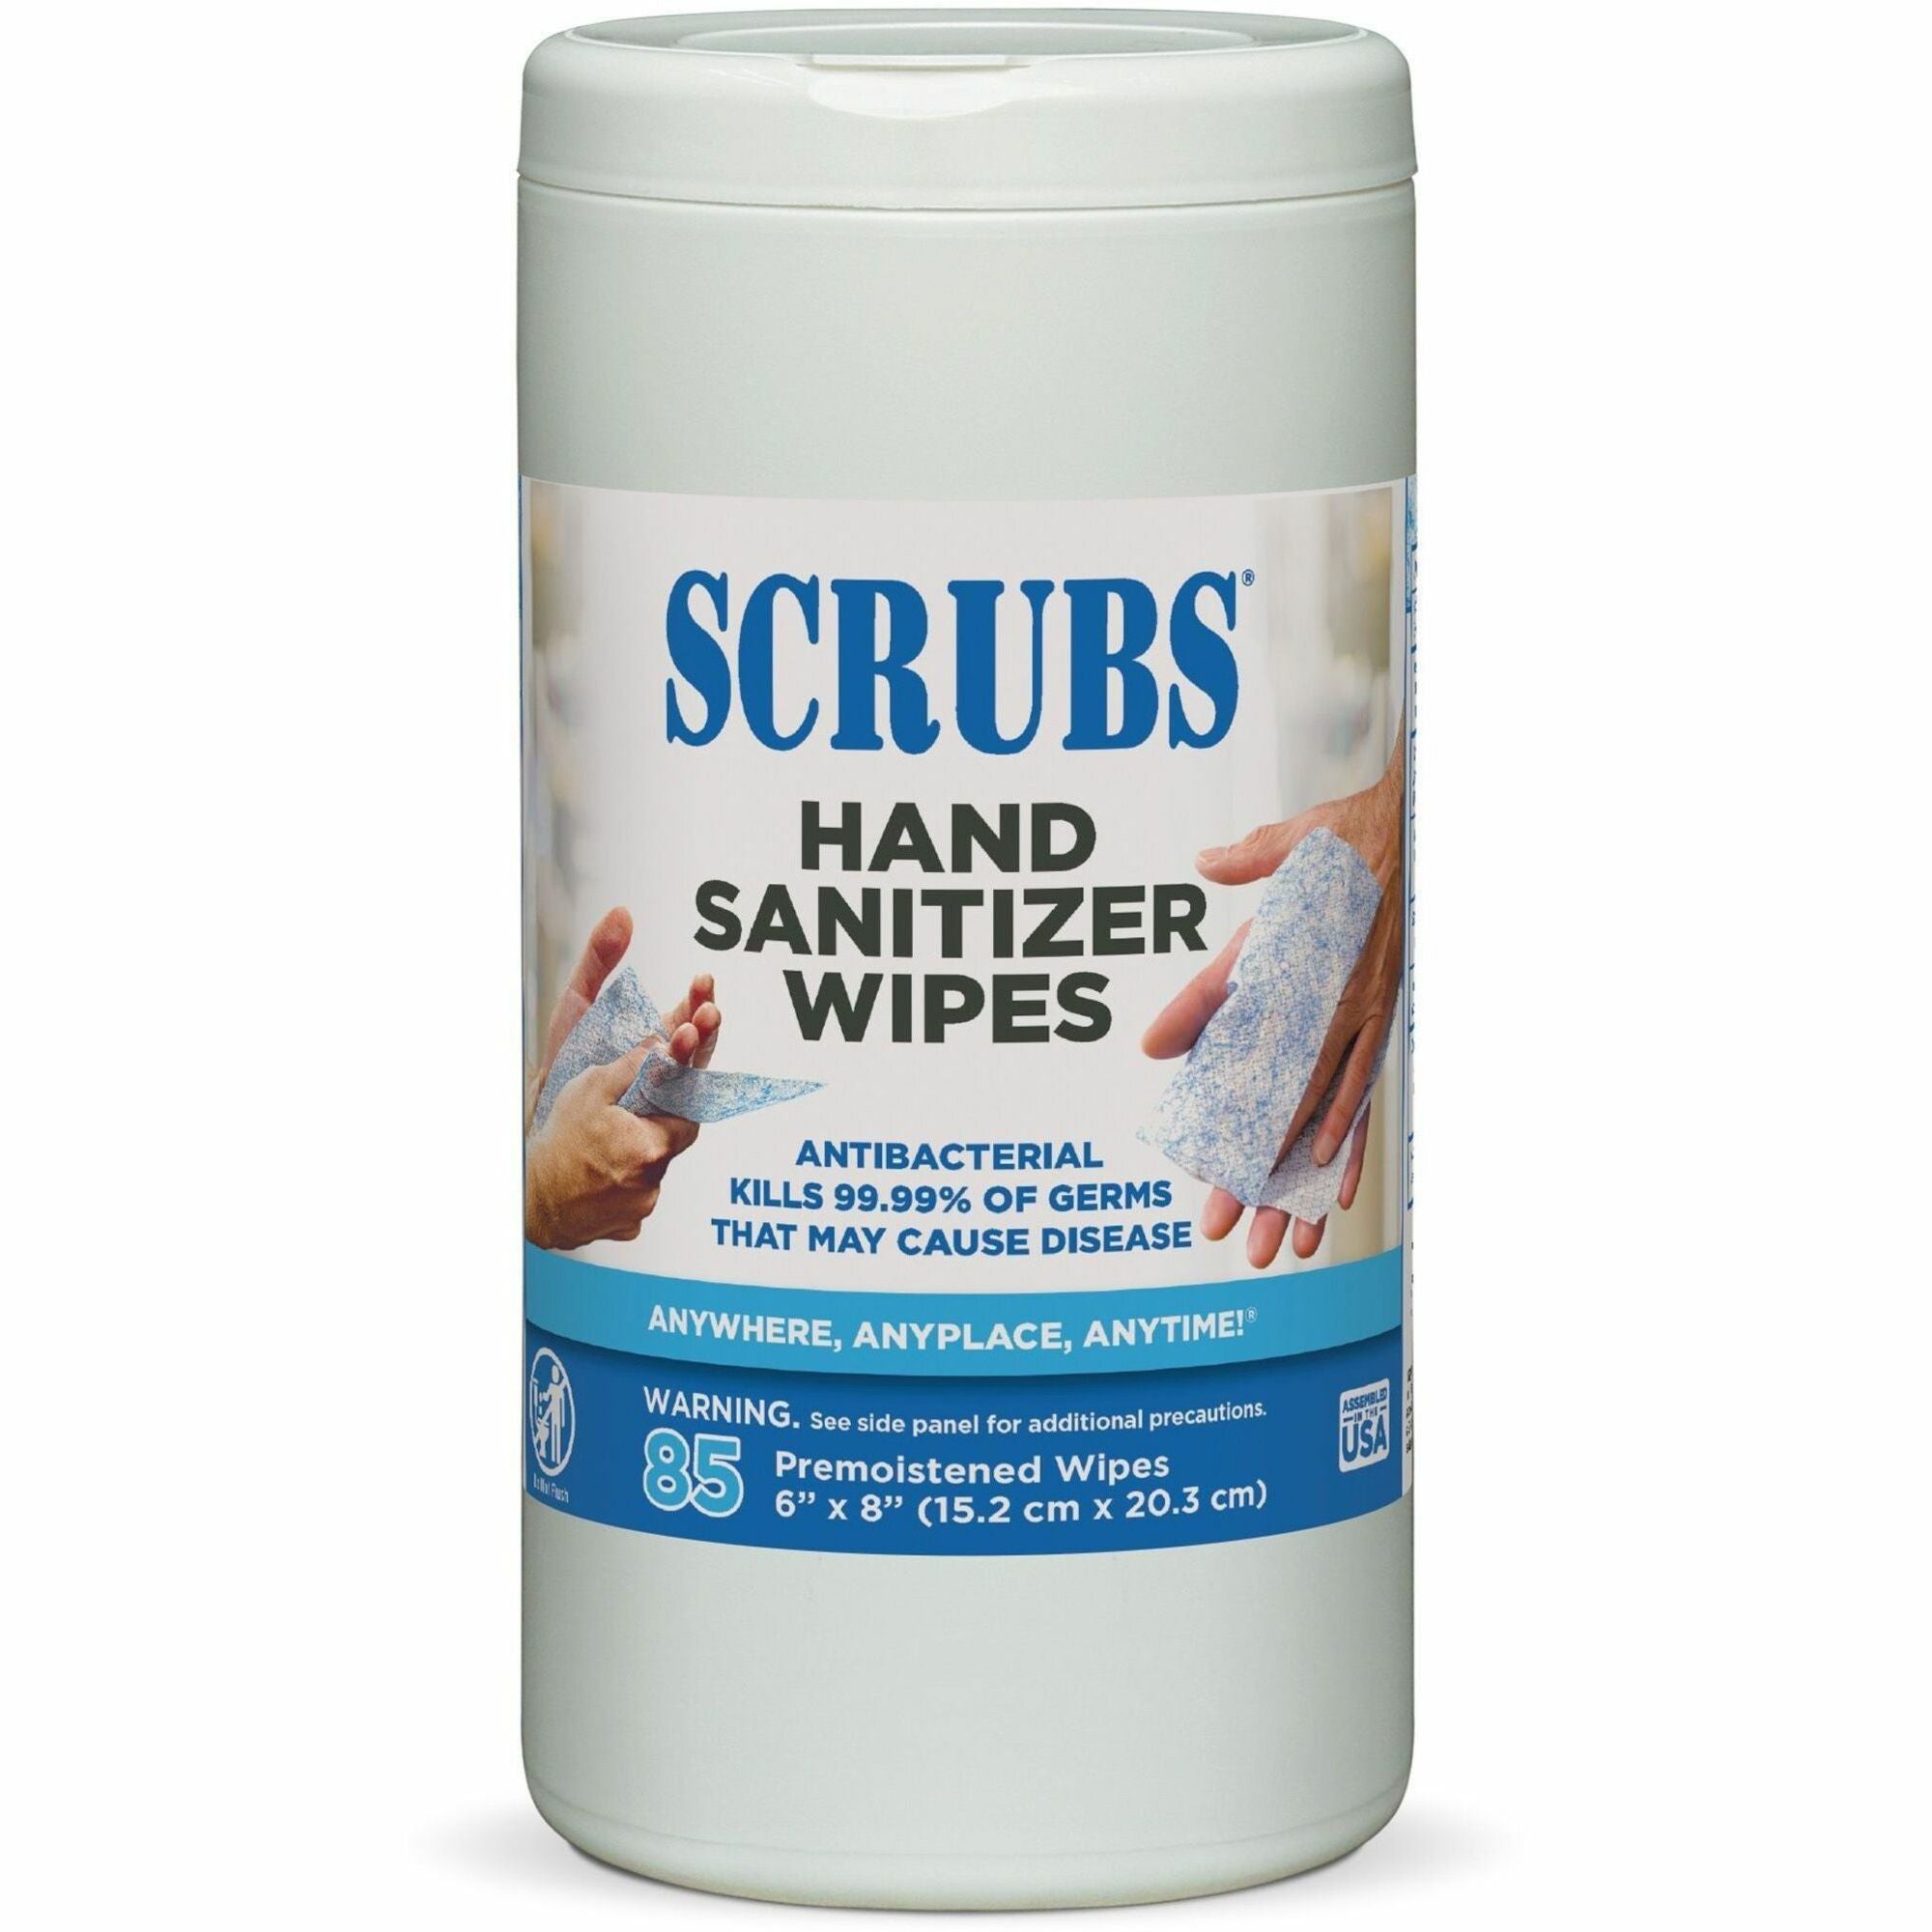 scrubs-hand-sanitizer-wipes-blue-white-abrasive-non-scratching-textured-anti-bacterial-for-hand-85-per-canister-6-carton_itw90985ct - 1